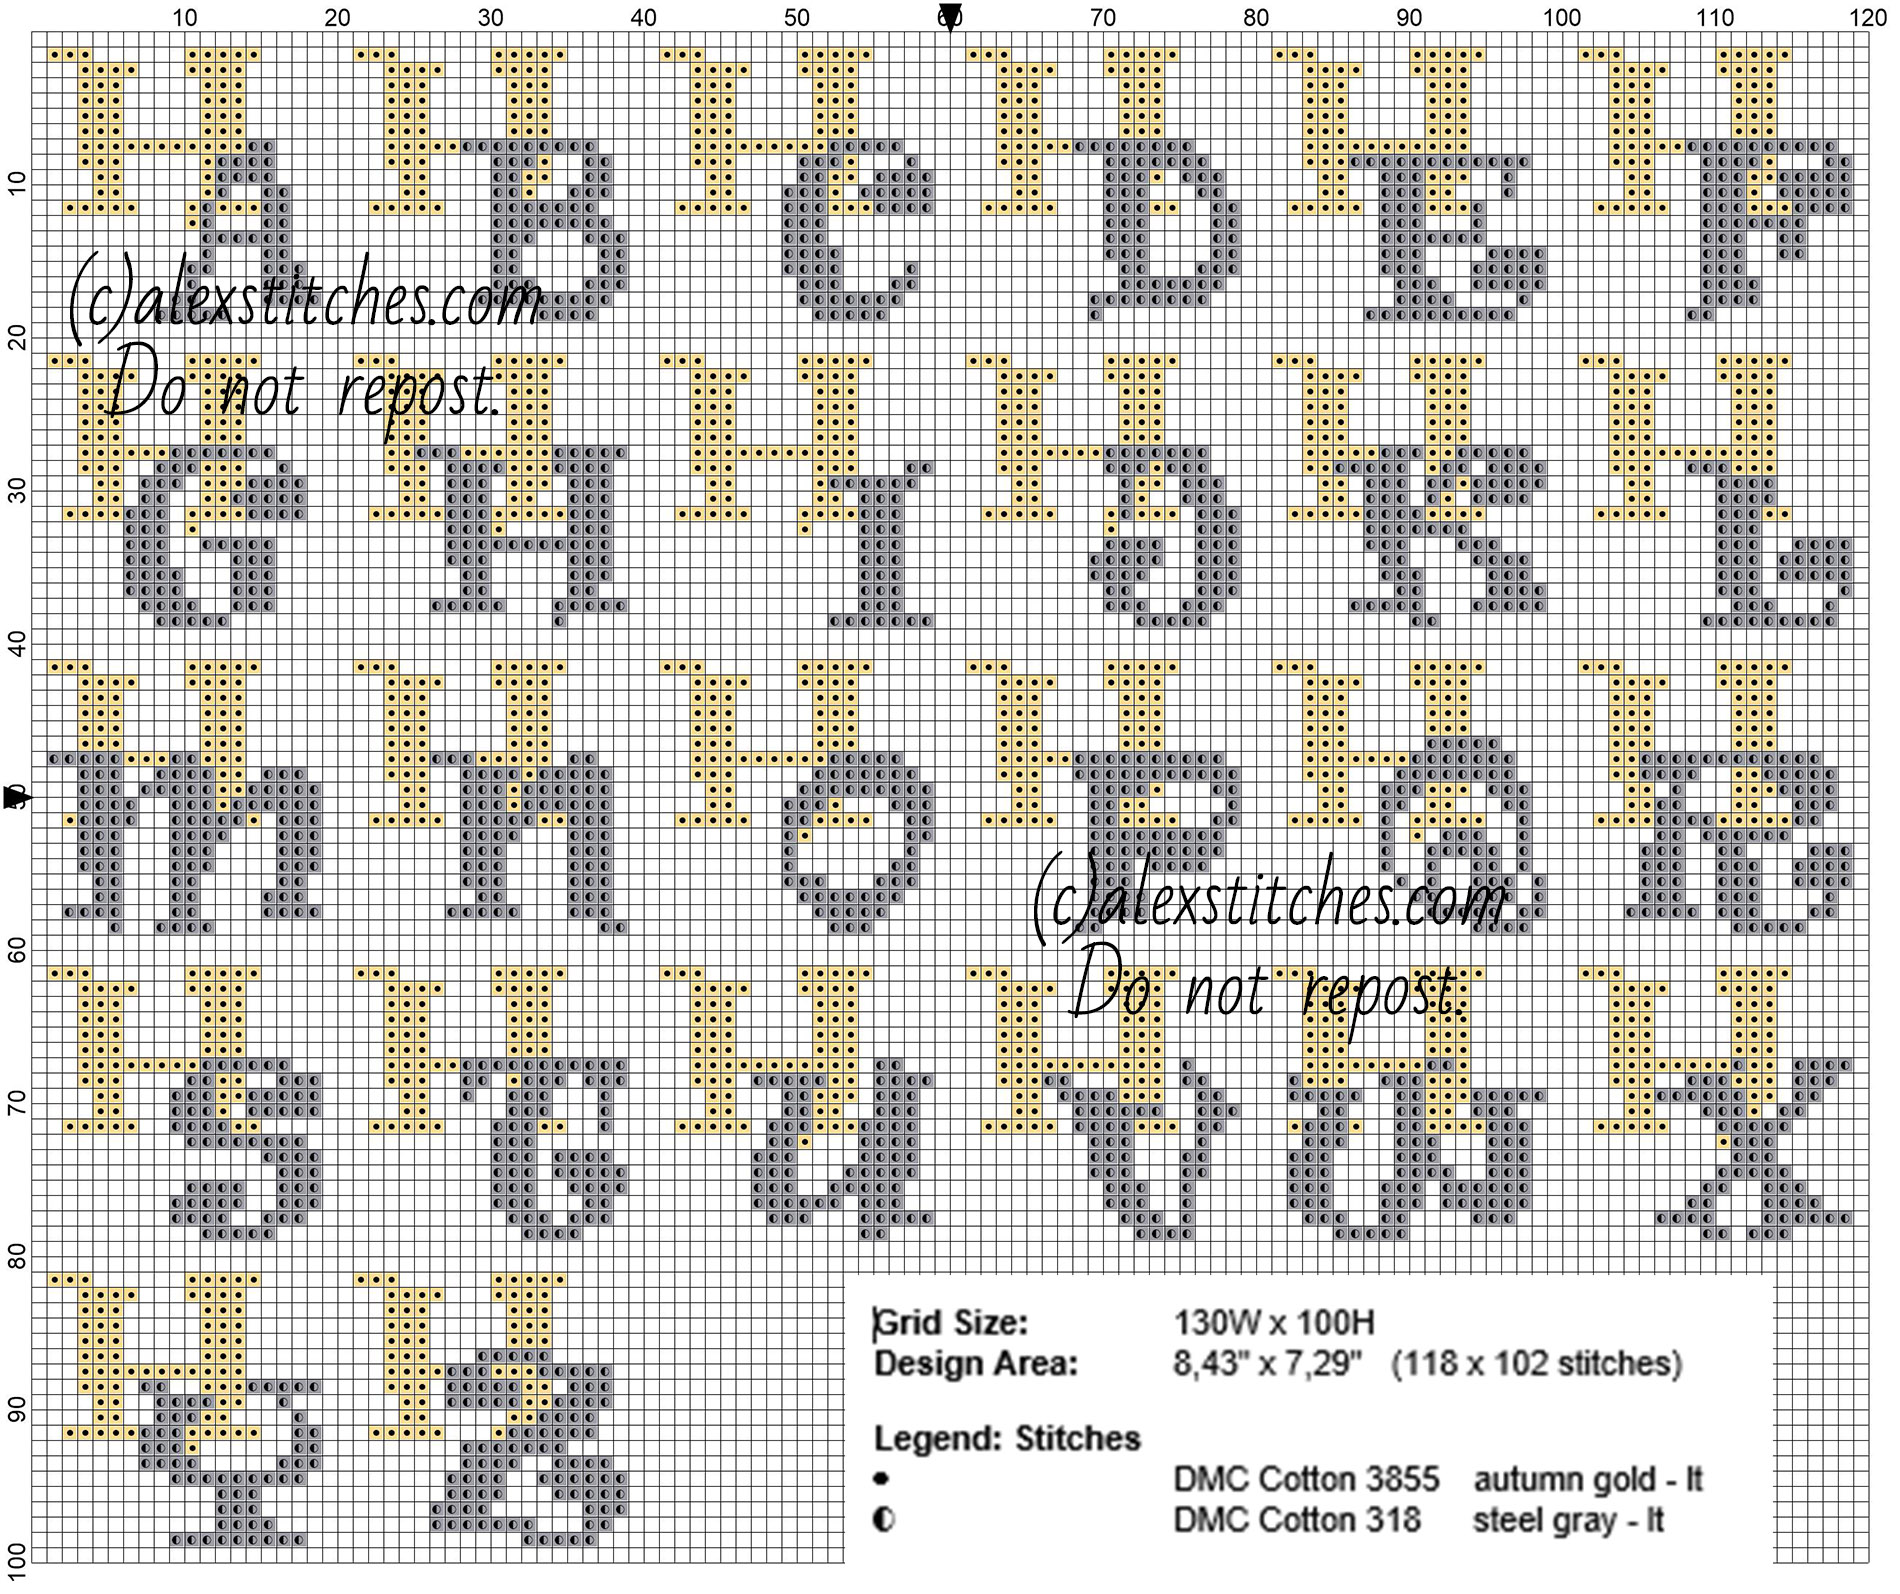 Cross stitch initials with letter H gold and silver colors free pattern download size 20 stitches